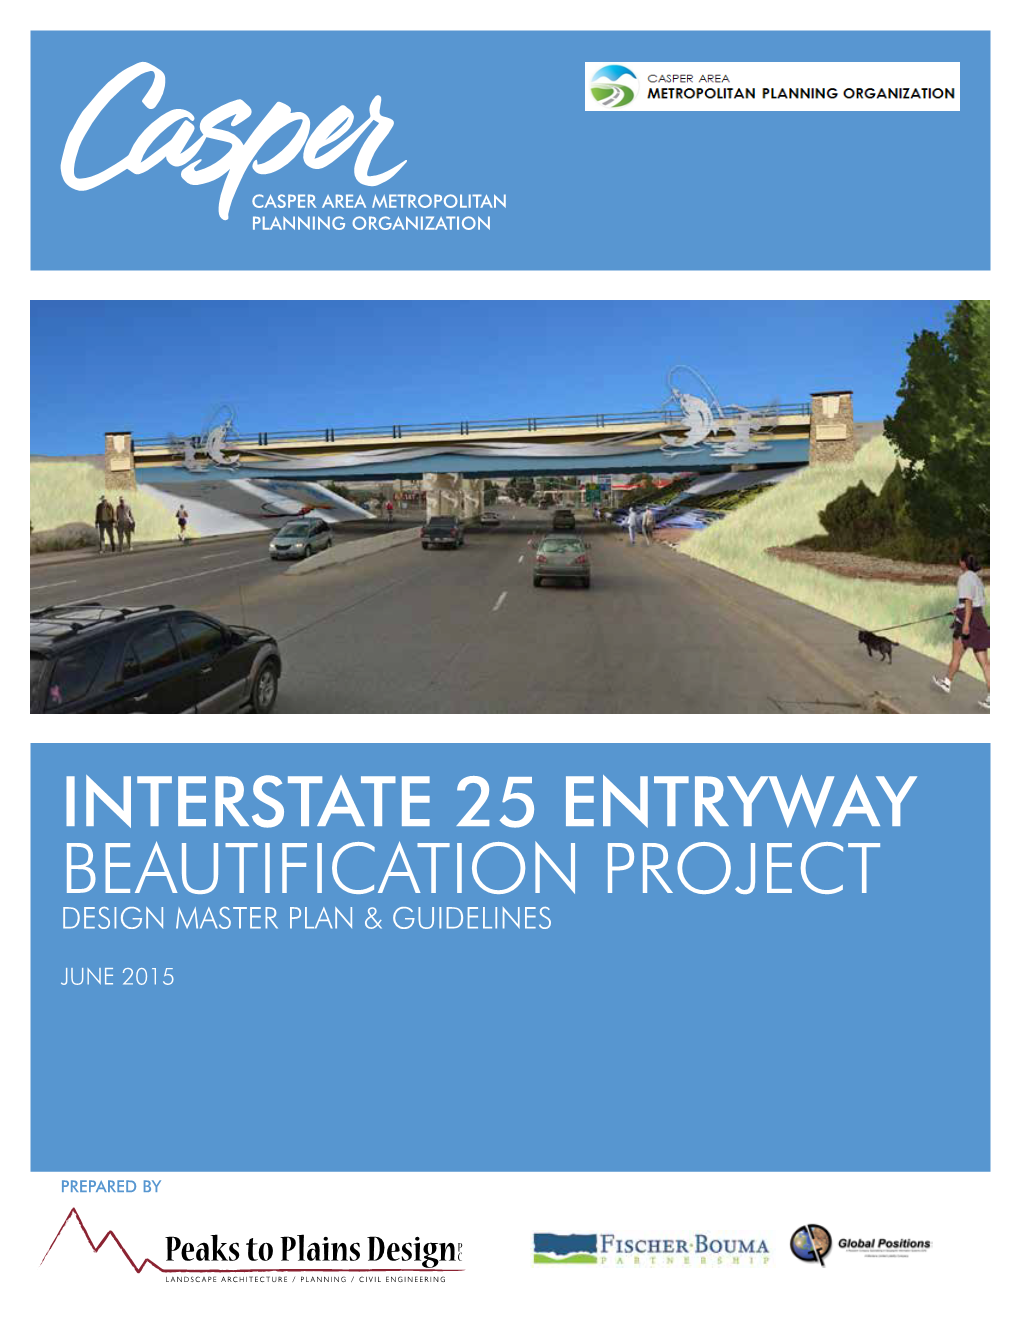 Interstate 25 Entryway Beautification Project Design Master Plan & Guidelines